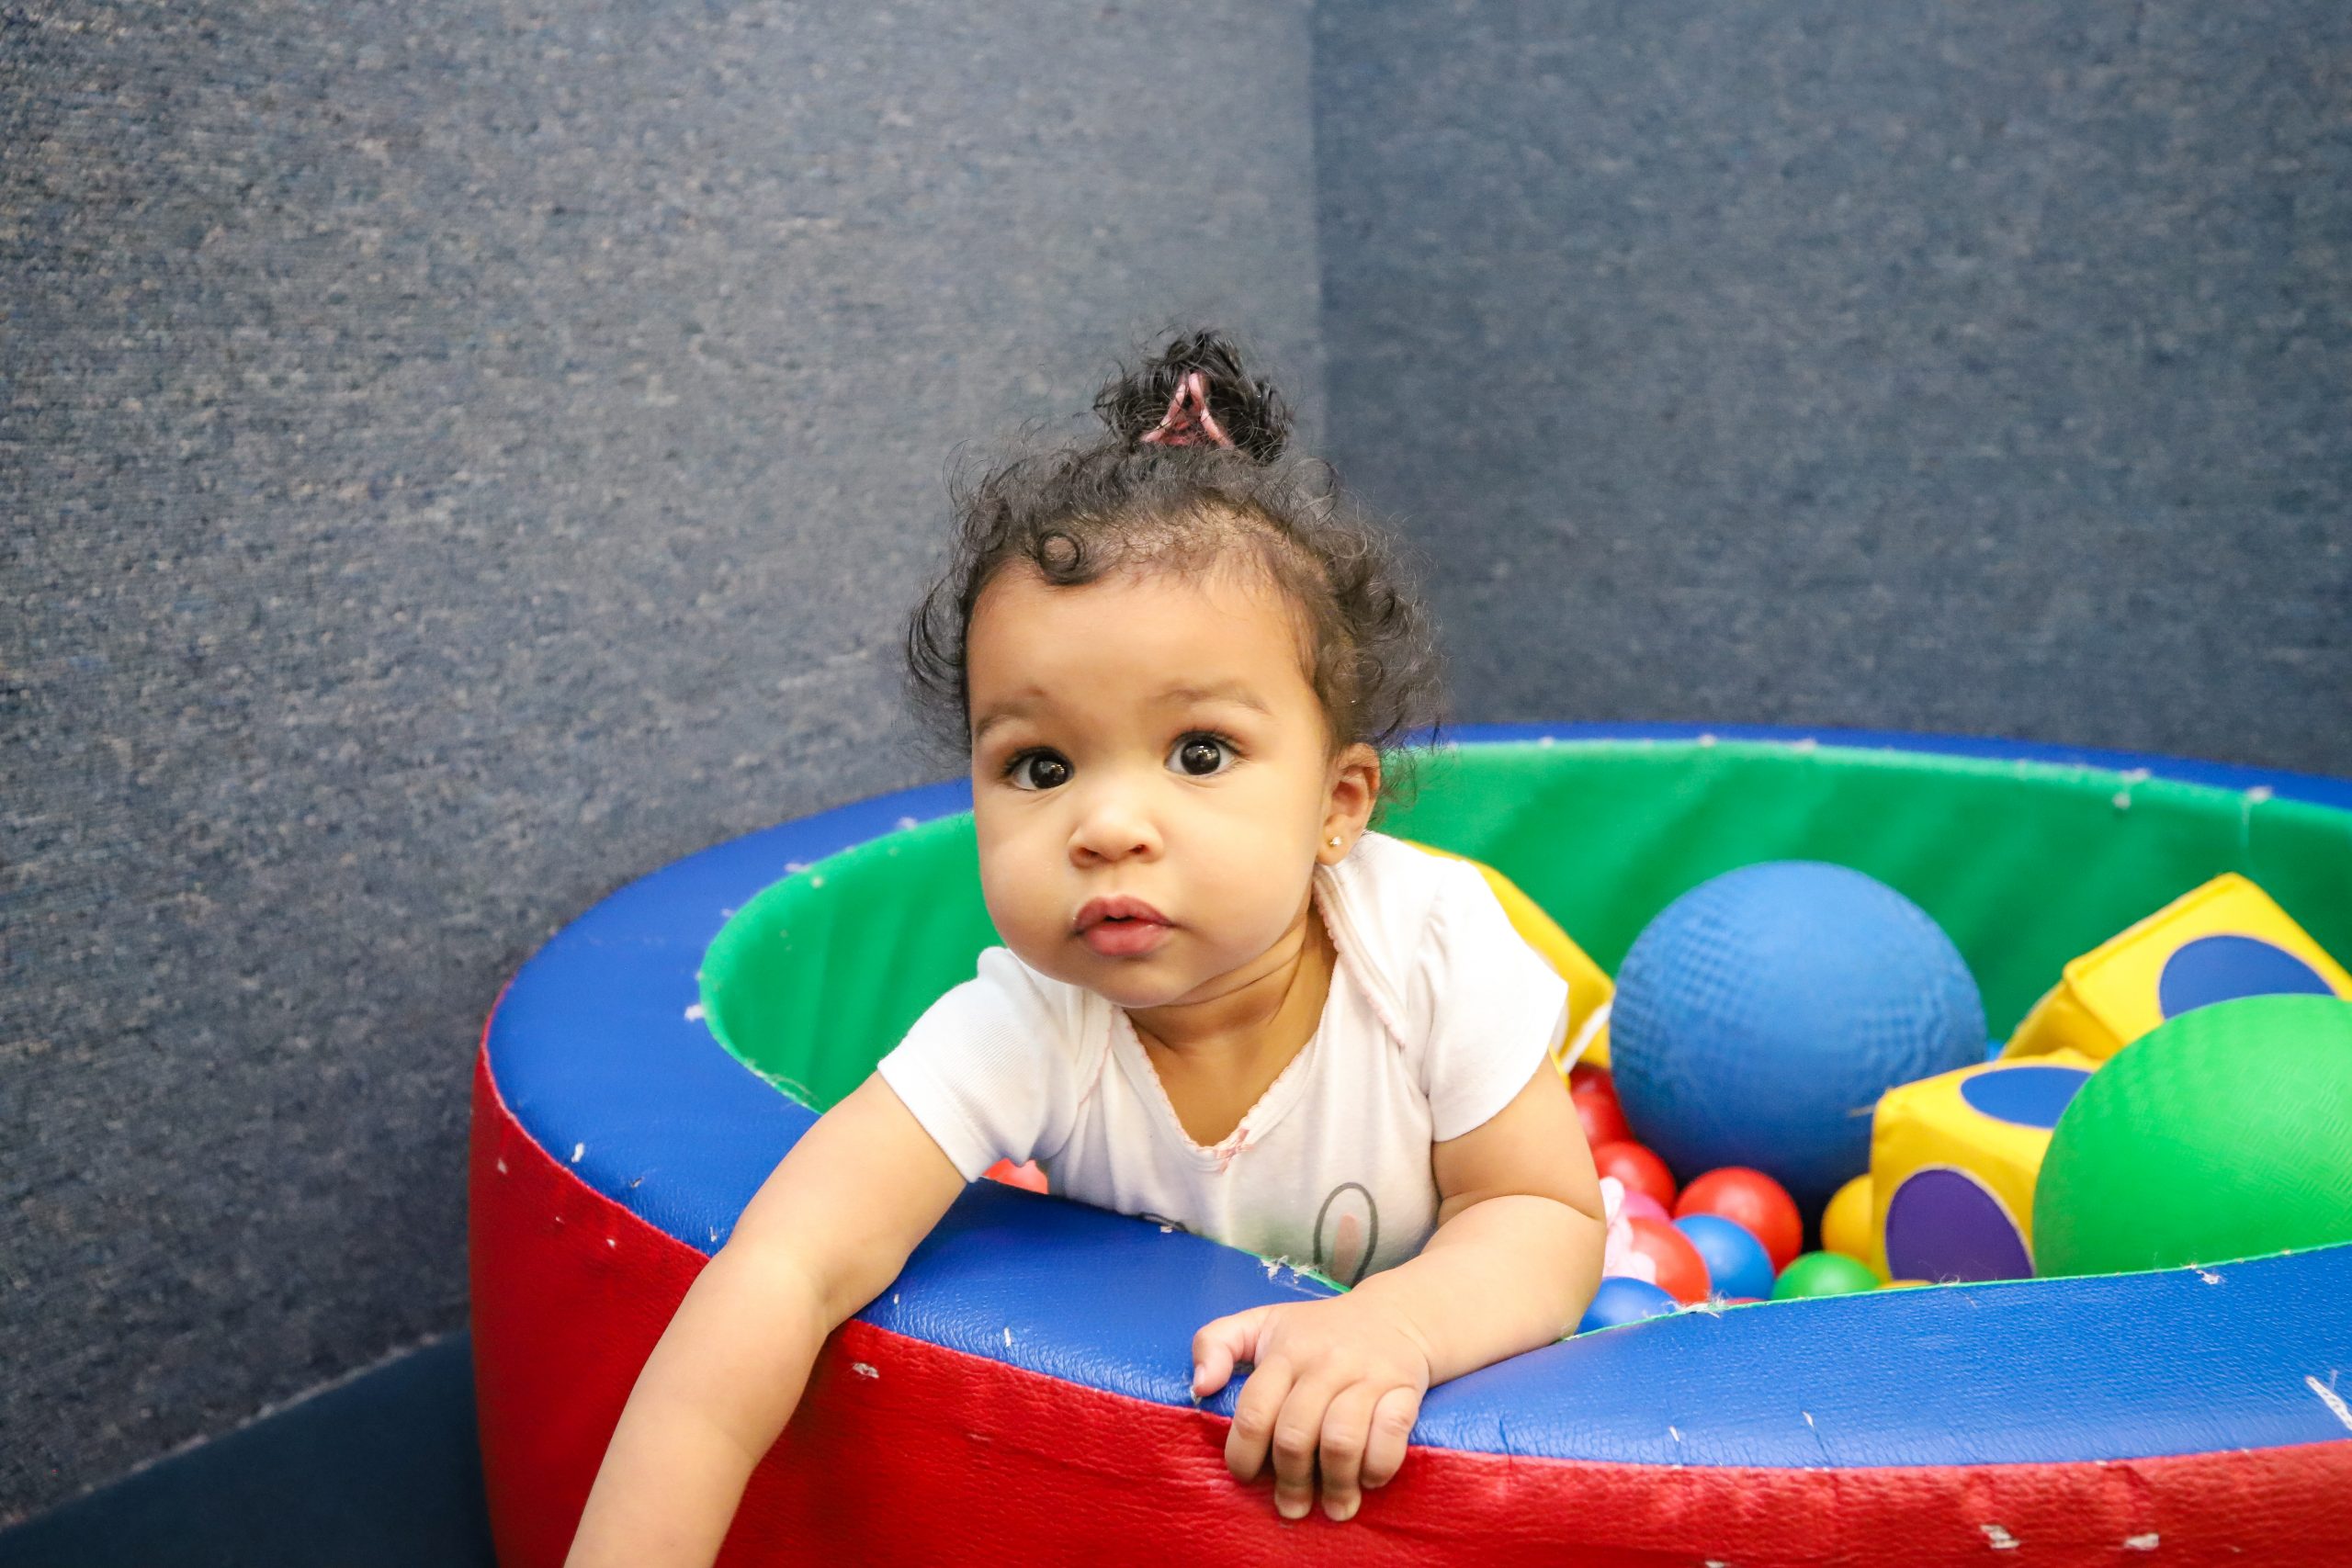 San Antonio and Austin Texas Professional Infant and Toddler Care Services